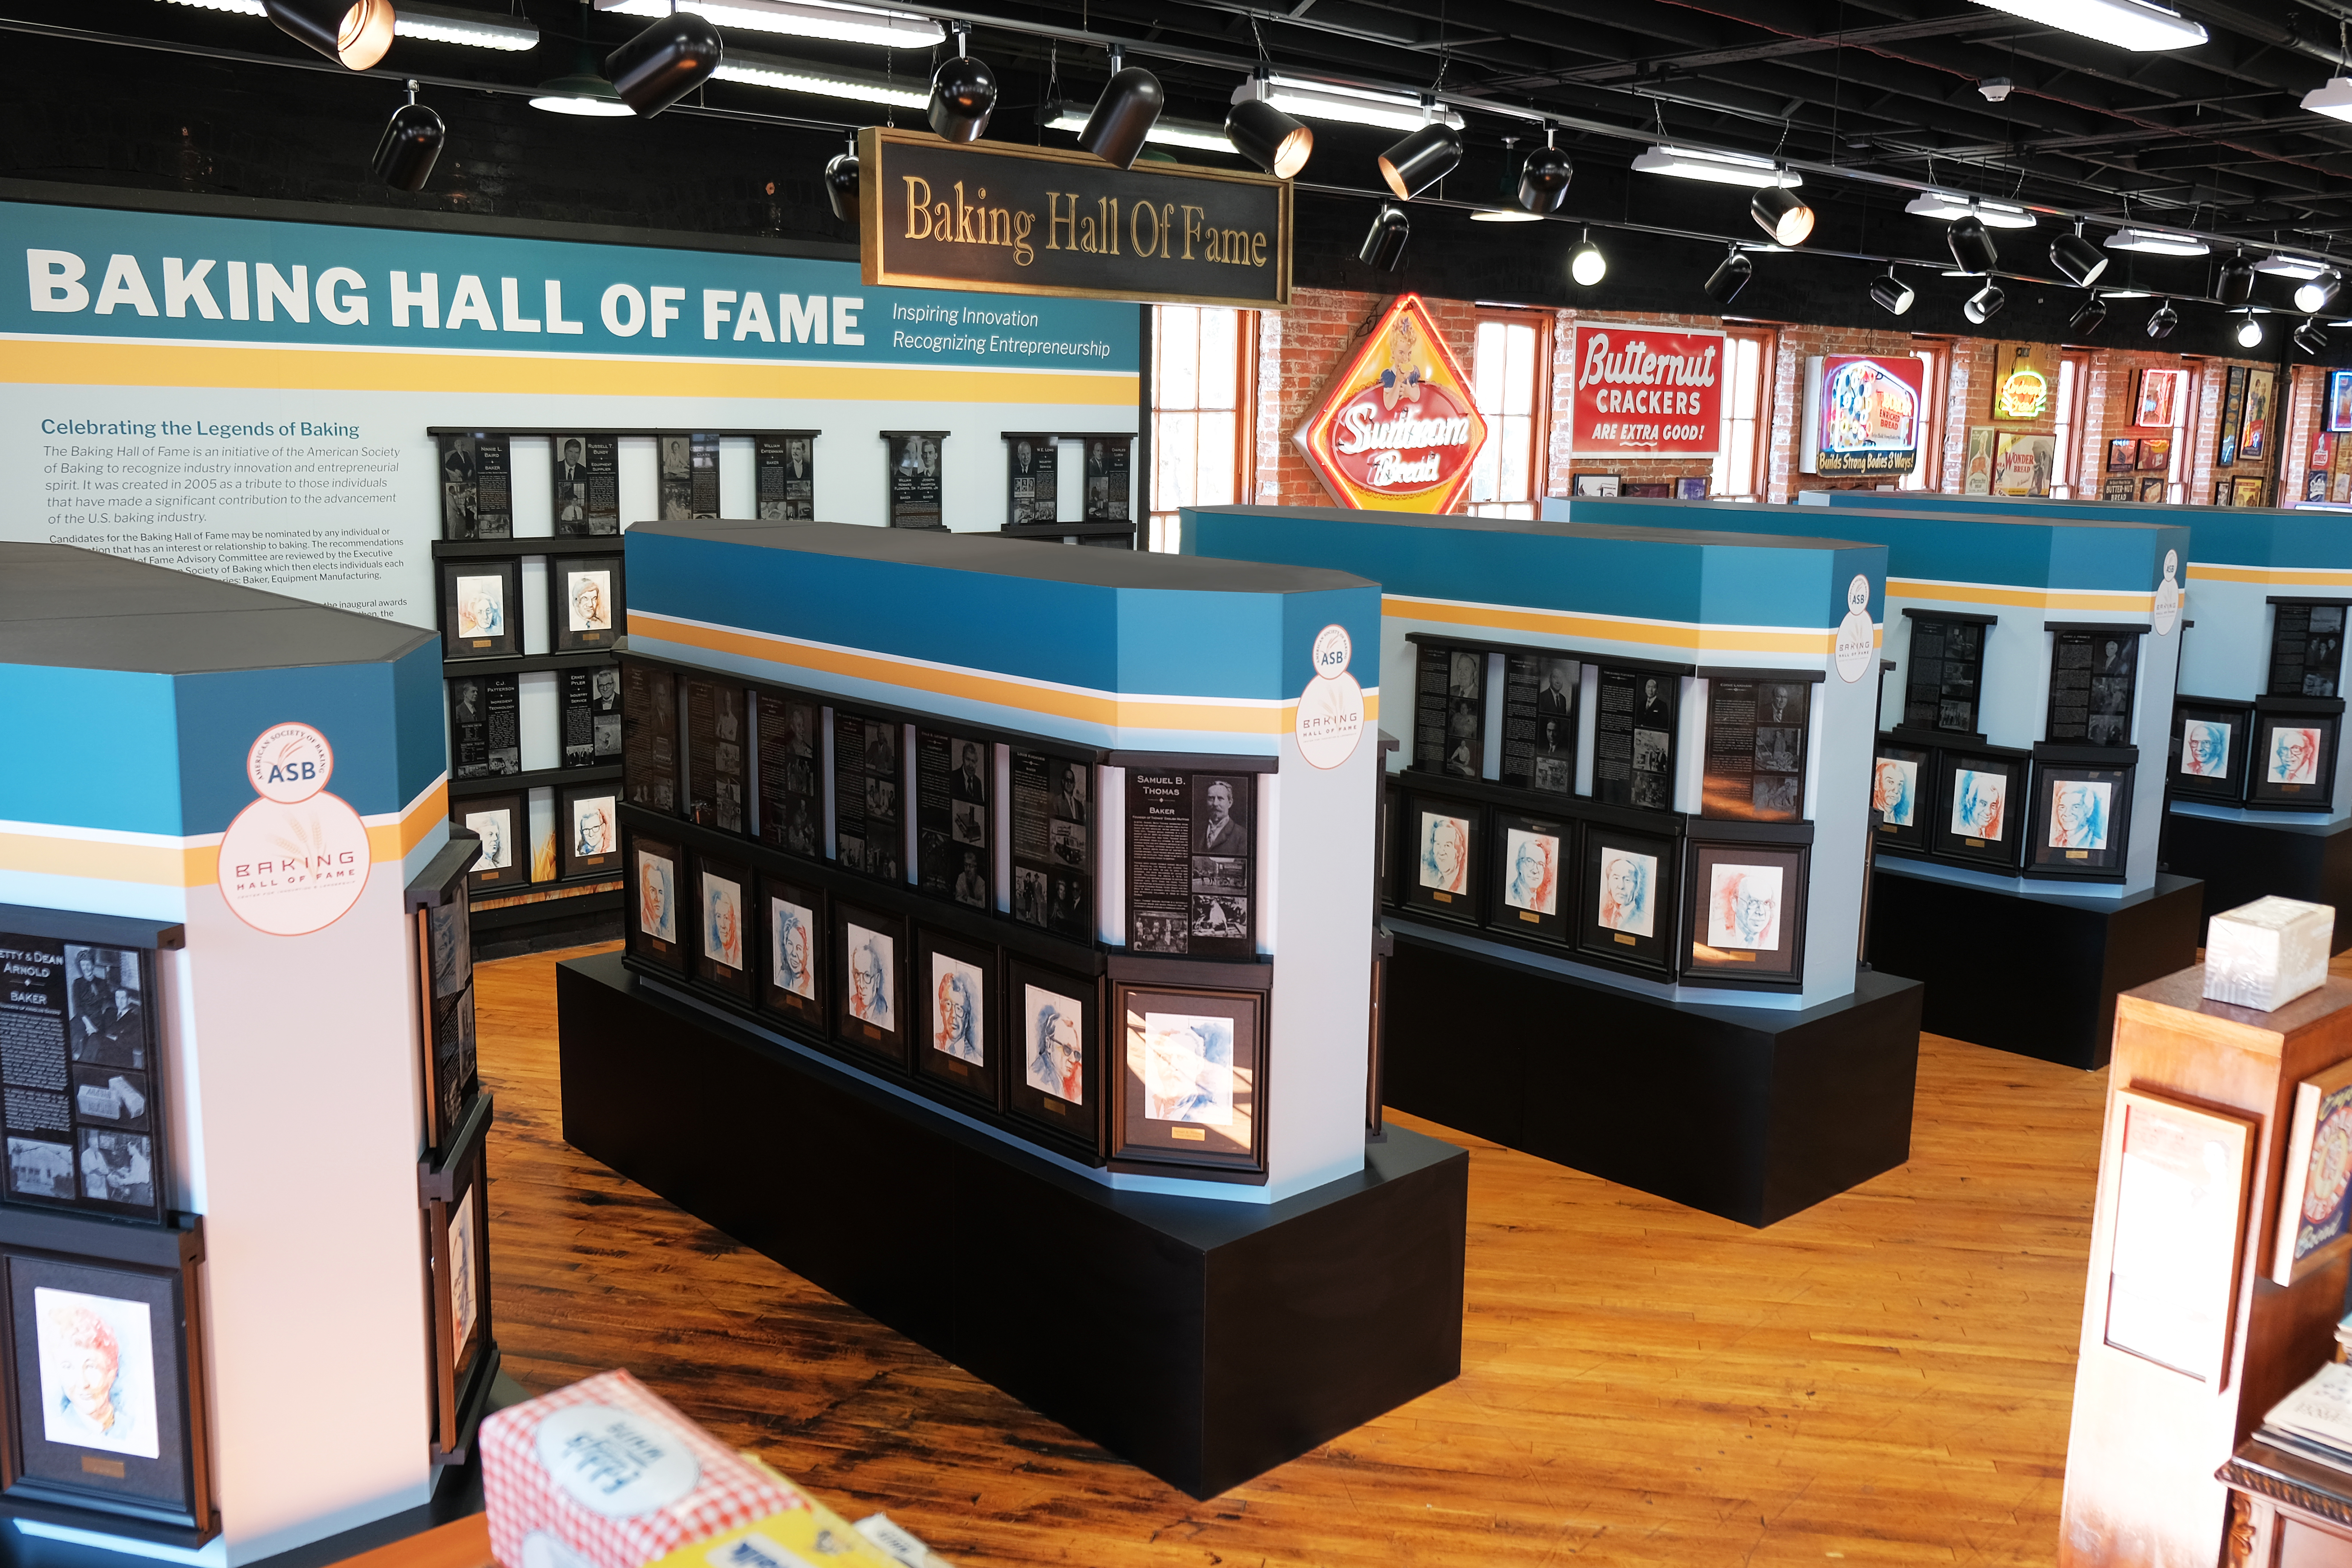 Two Industry Icons Retire from ASB’s Baking Hall of Fame Evaluation Committee